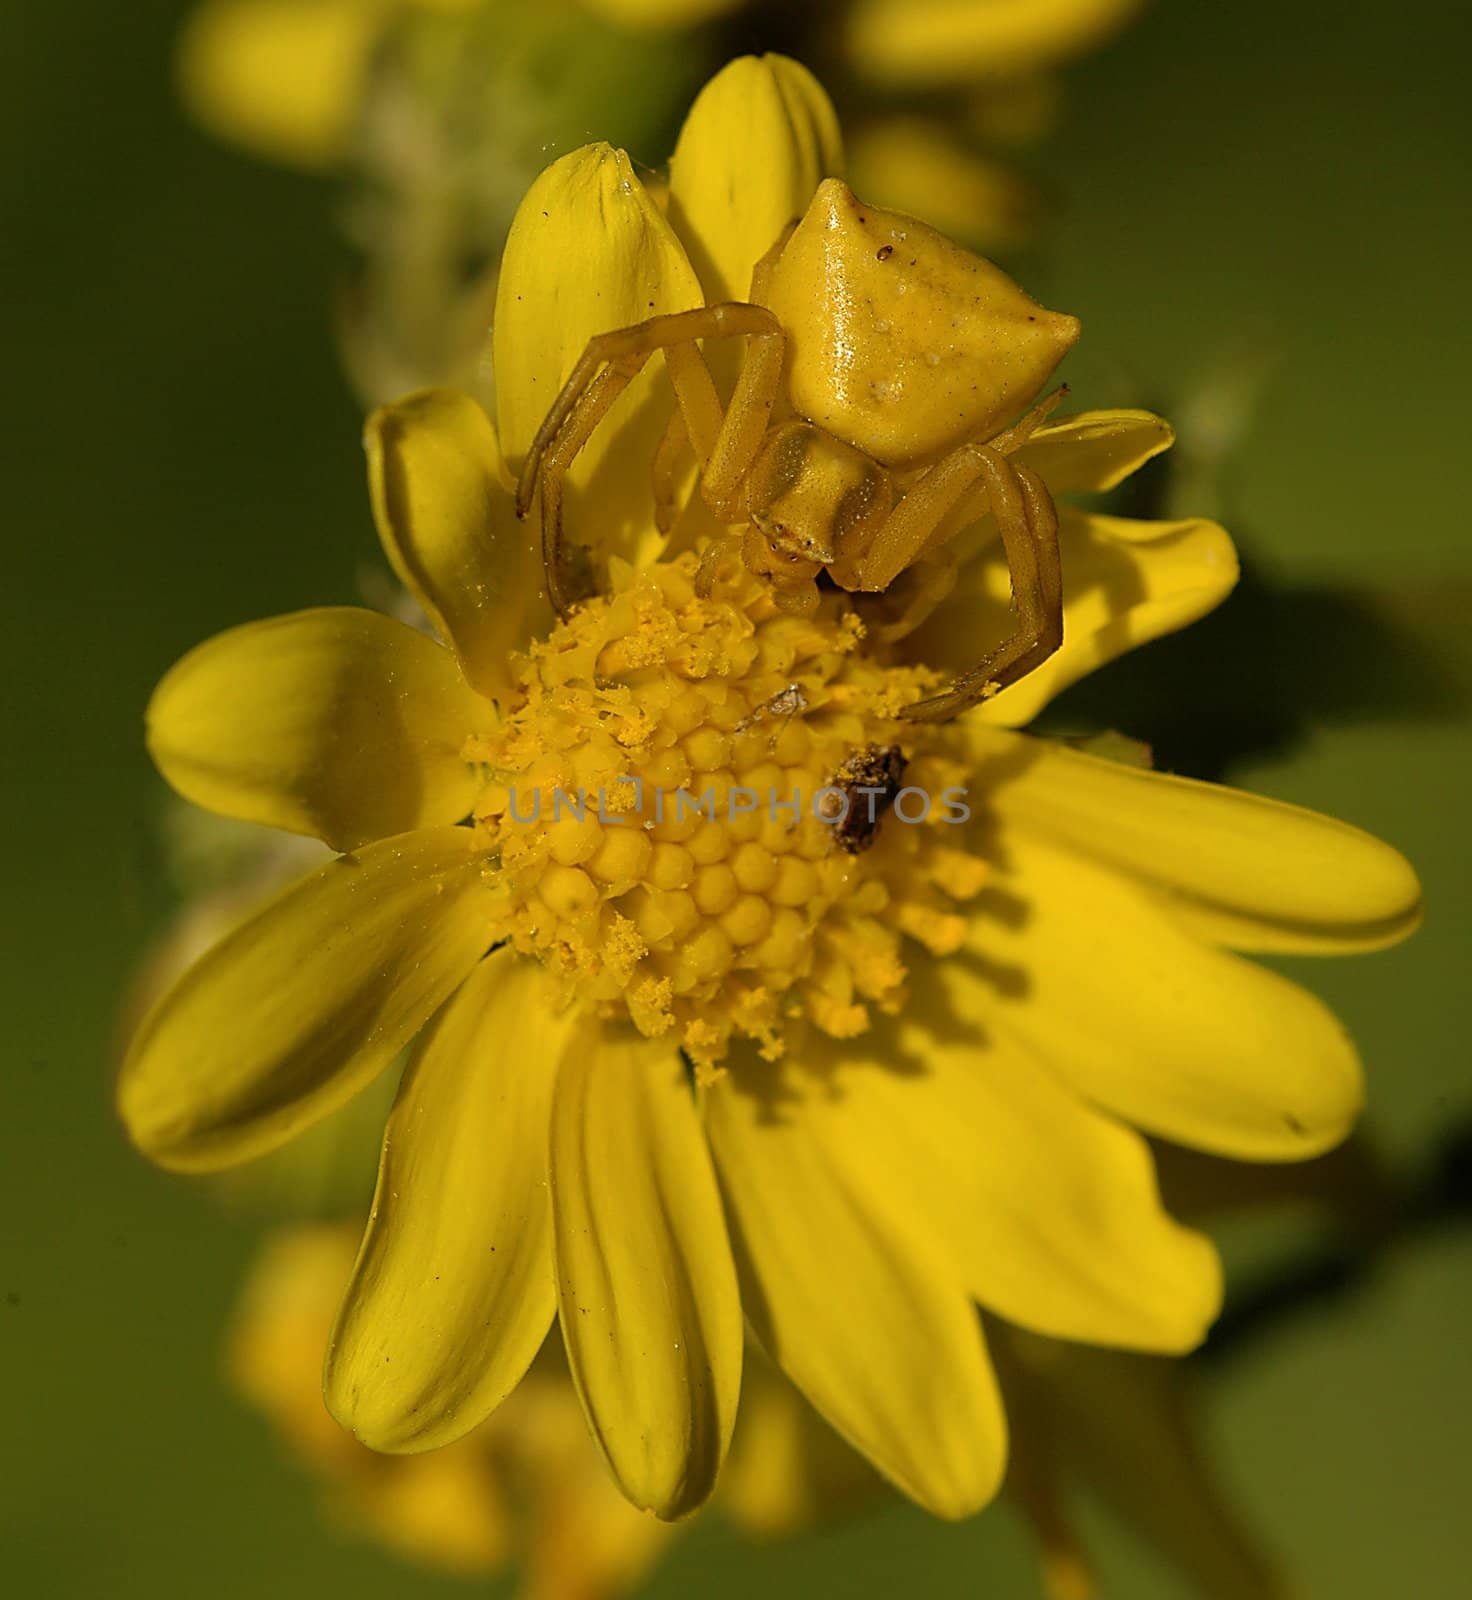 Yellow spider on a yellow flower in the field